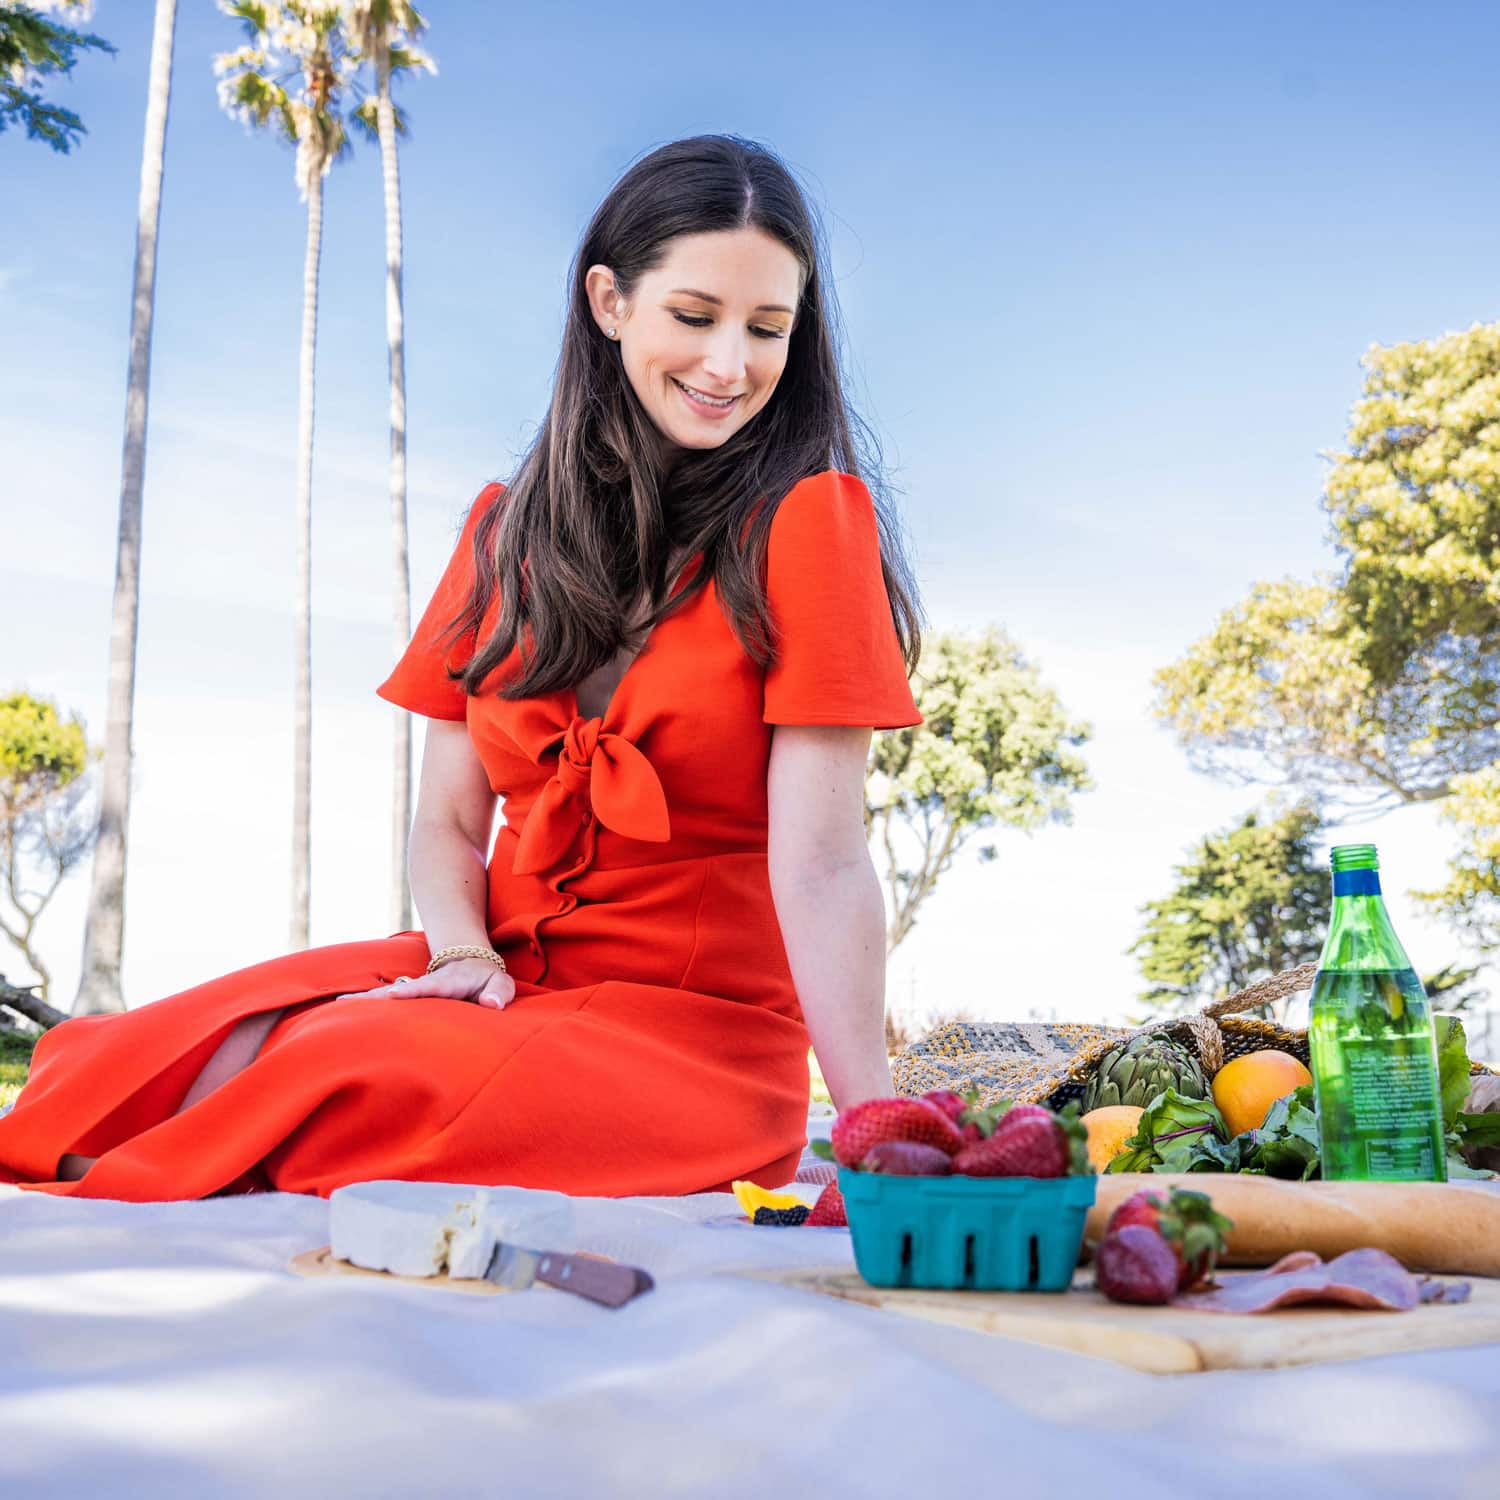 Emily Luxford, autoimmune, pediatric and food sensitivity dietitian, has a picnic with fruits, veggies, and cheeses in a California park